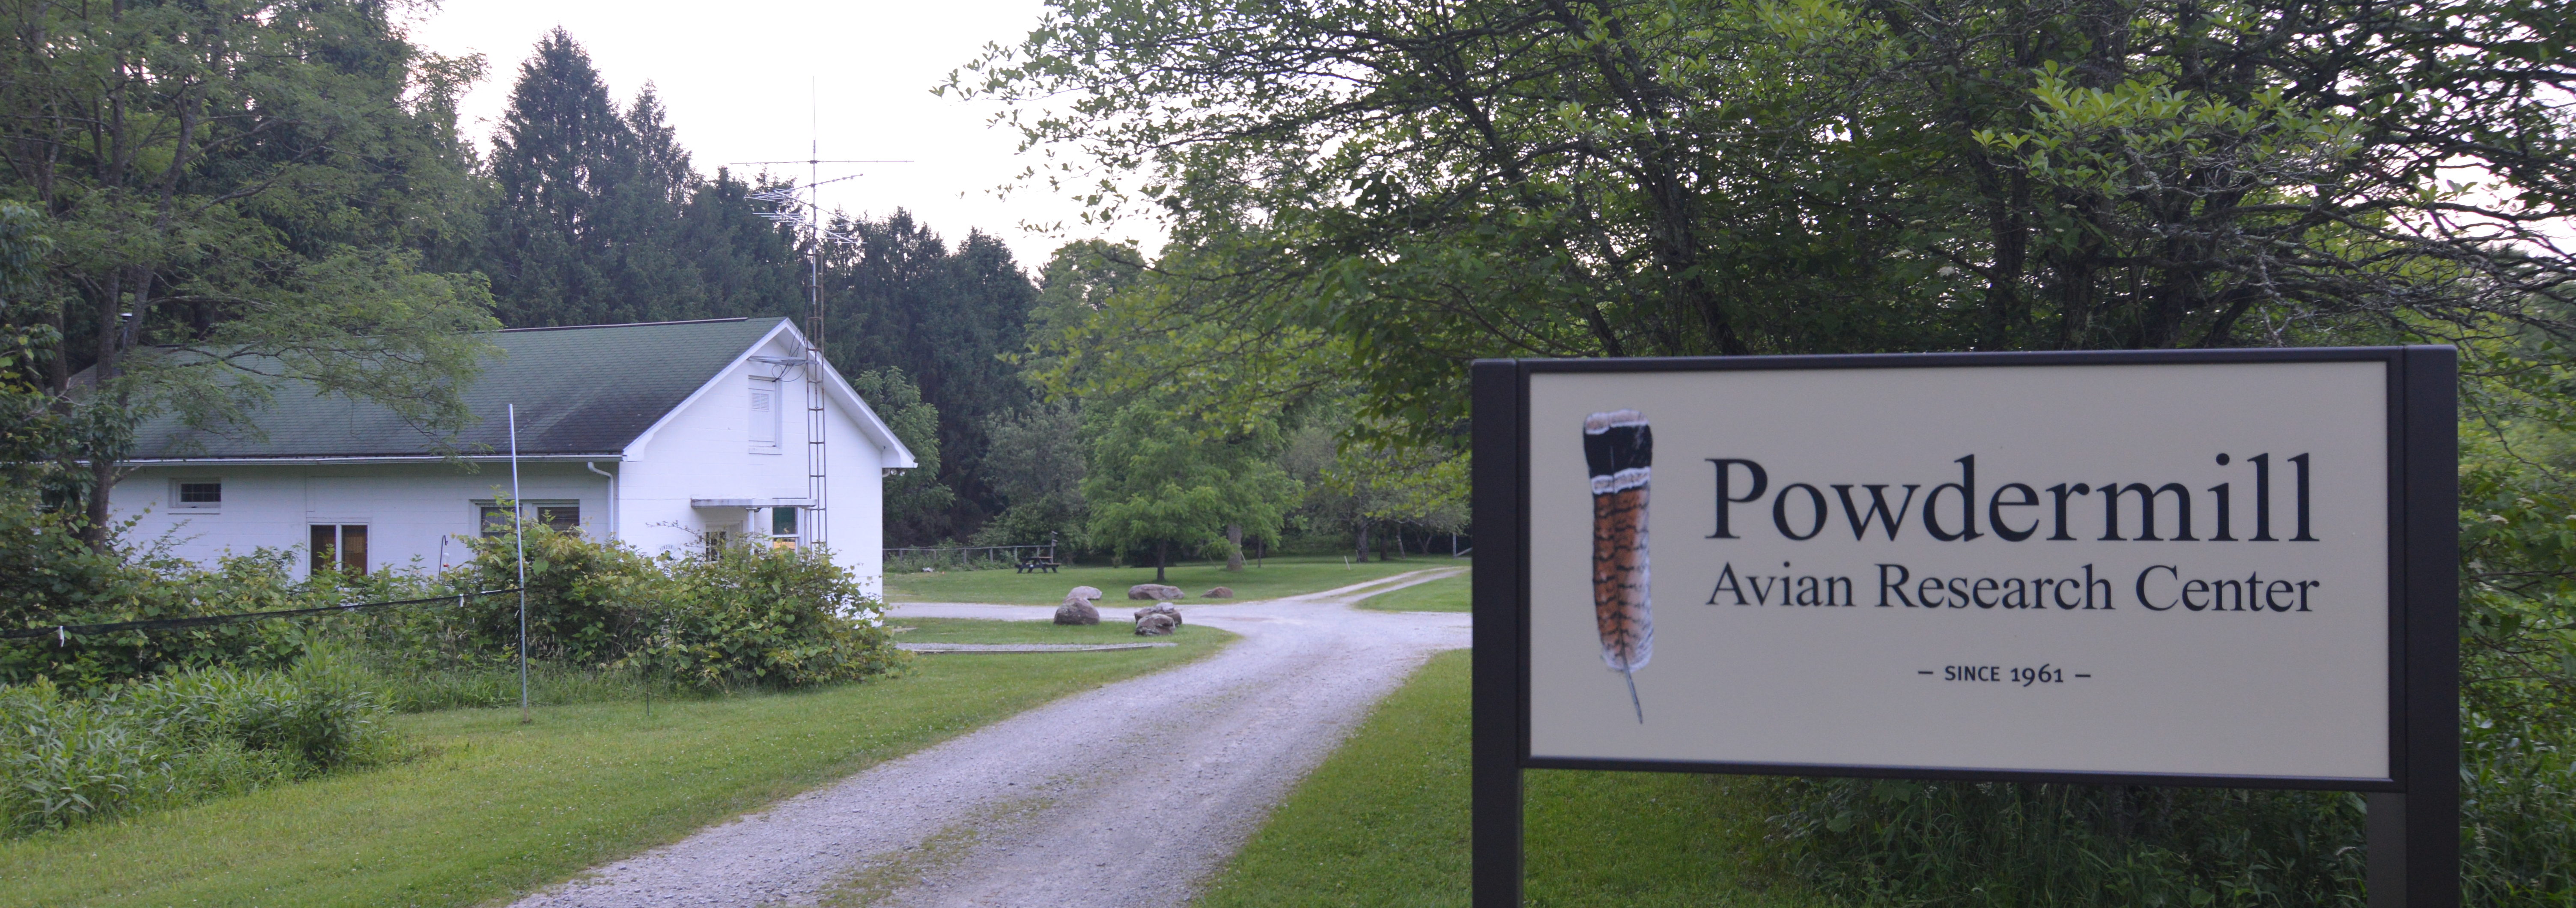 Powdermill Avian Research Center lab building and sign